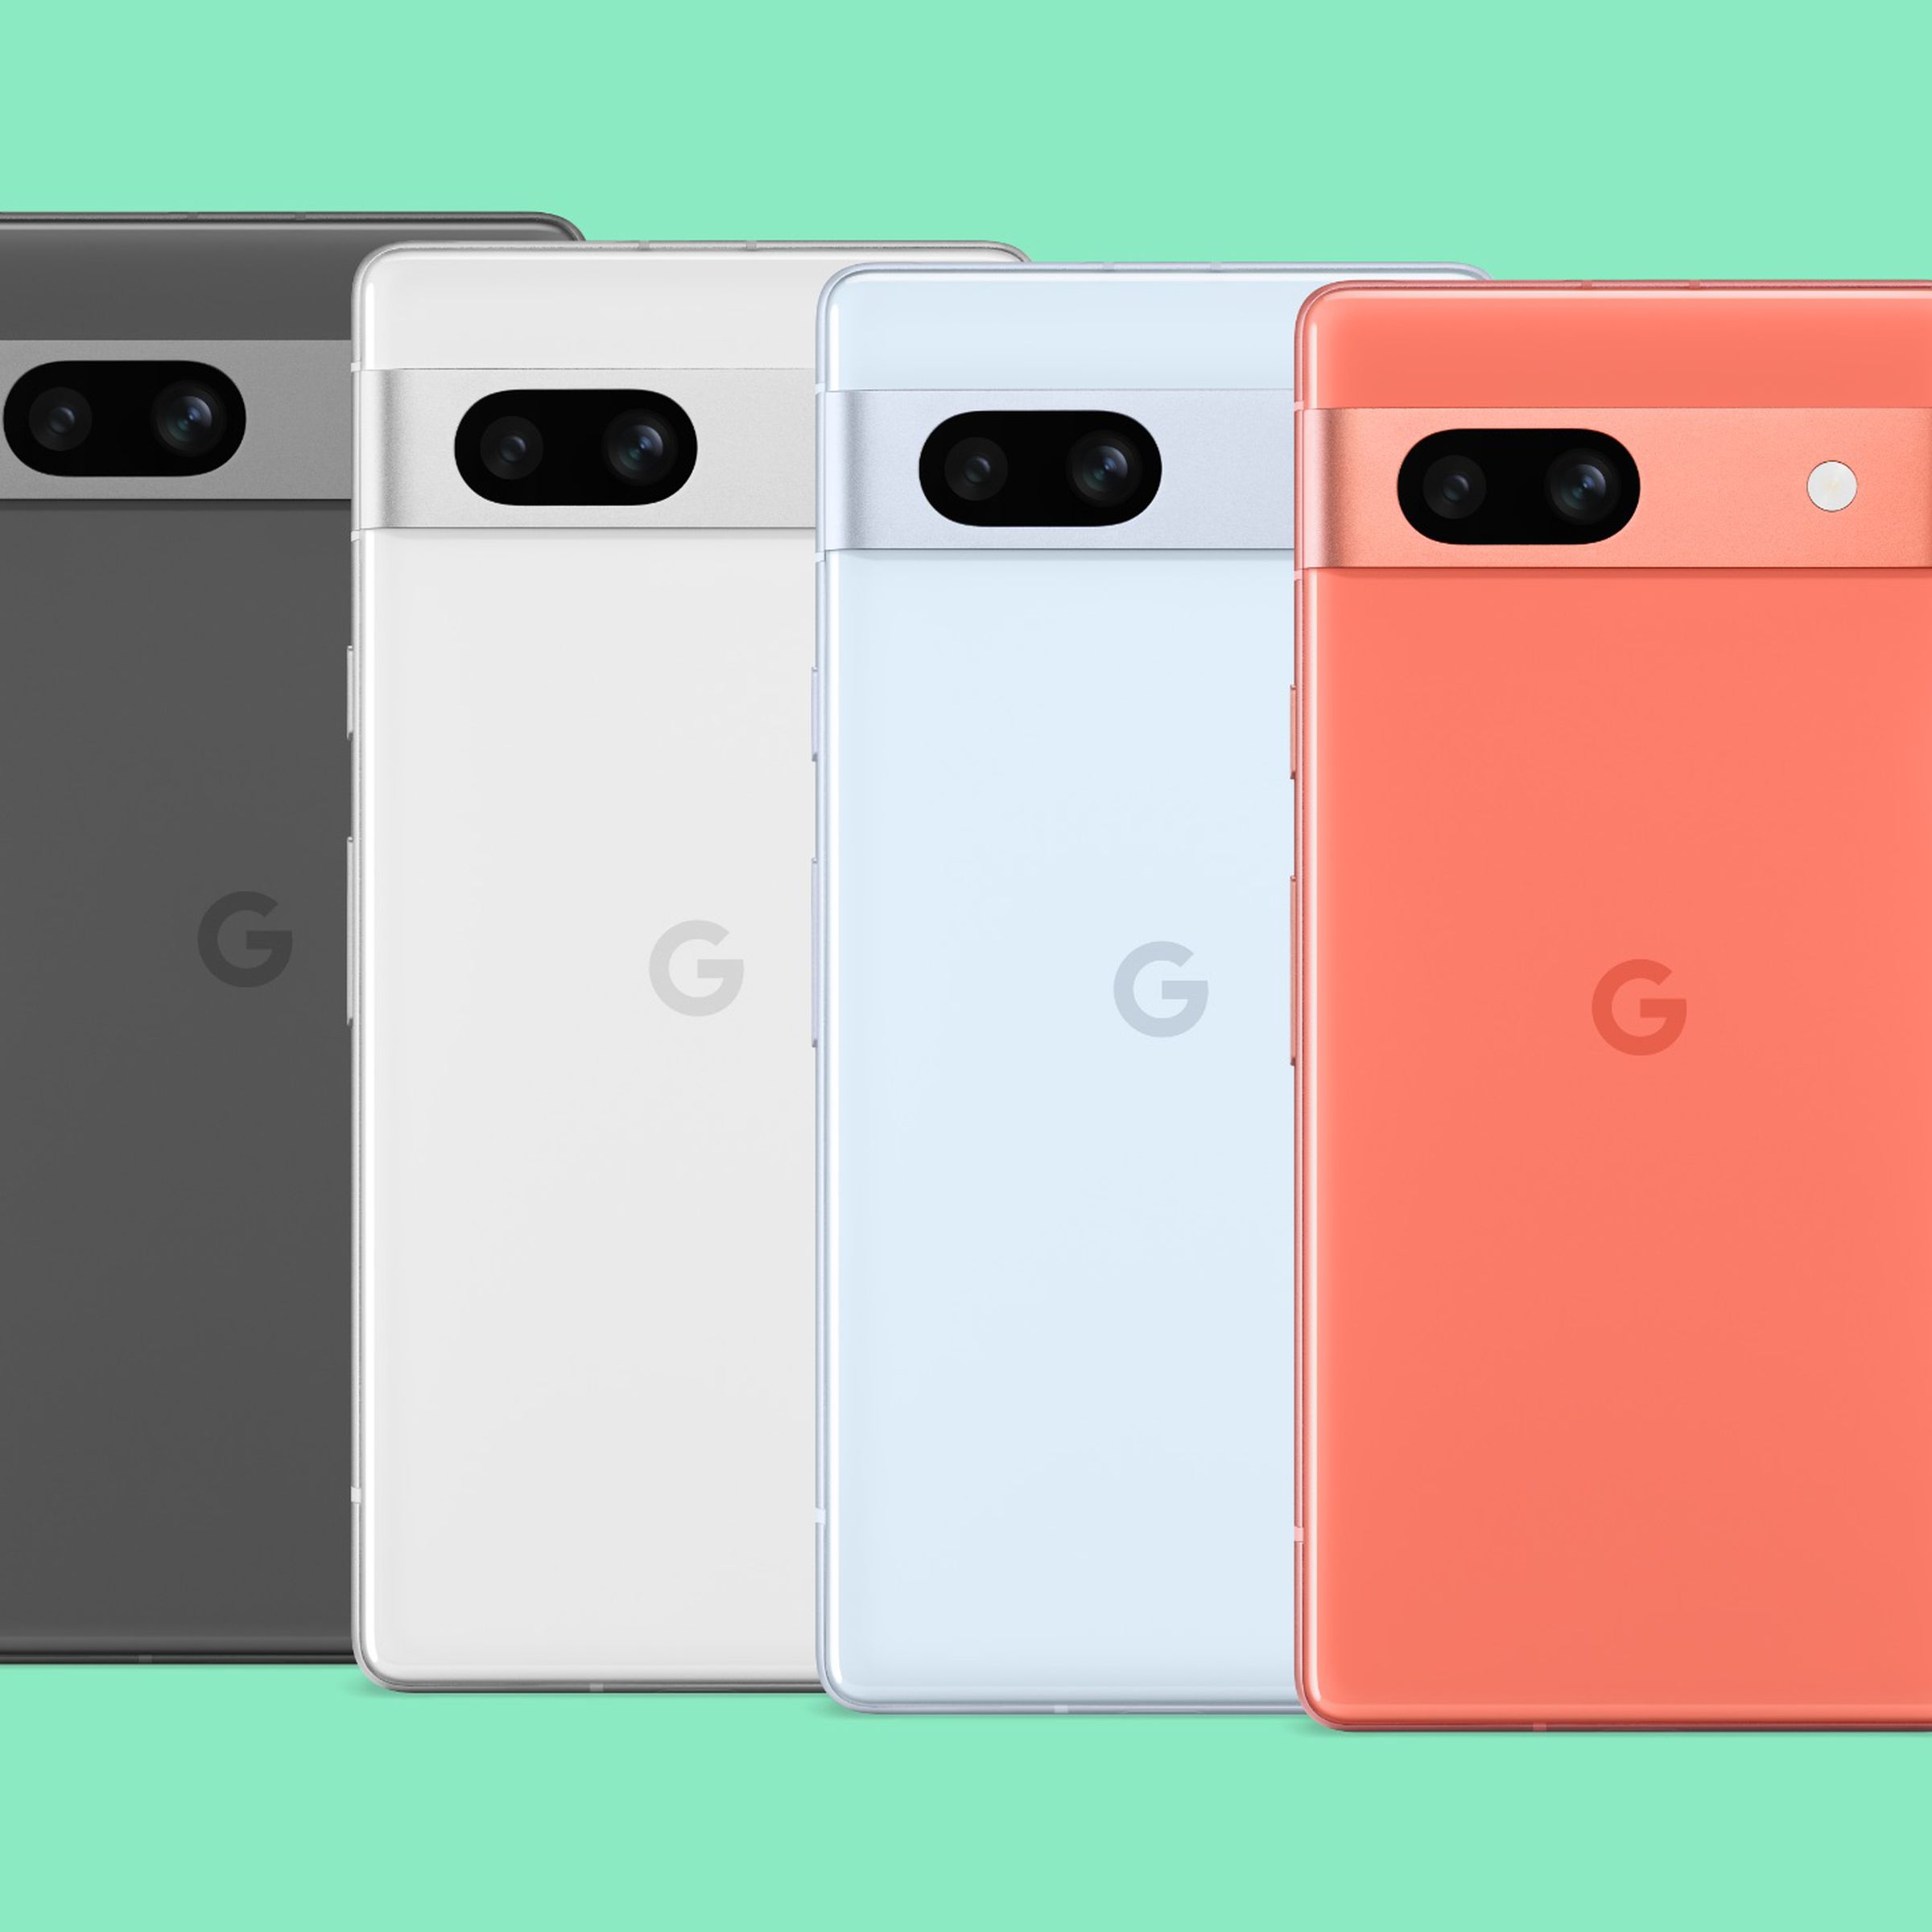 A marketing image of the four colors of Google’s Pixel 7A.